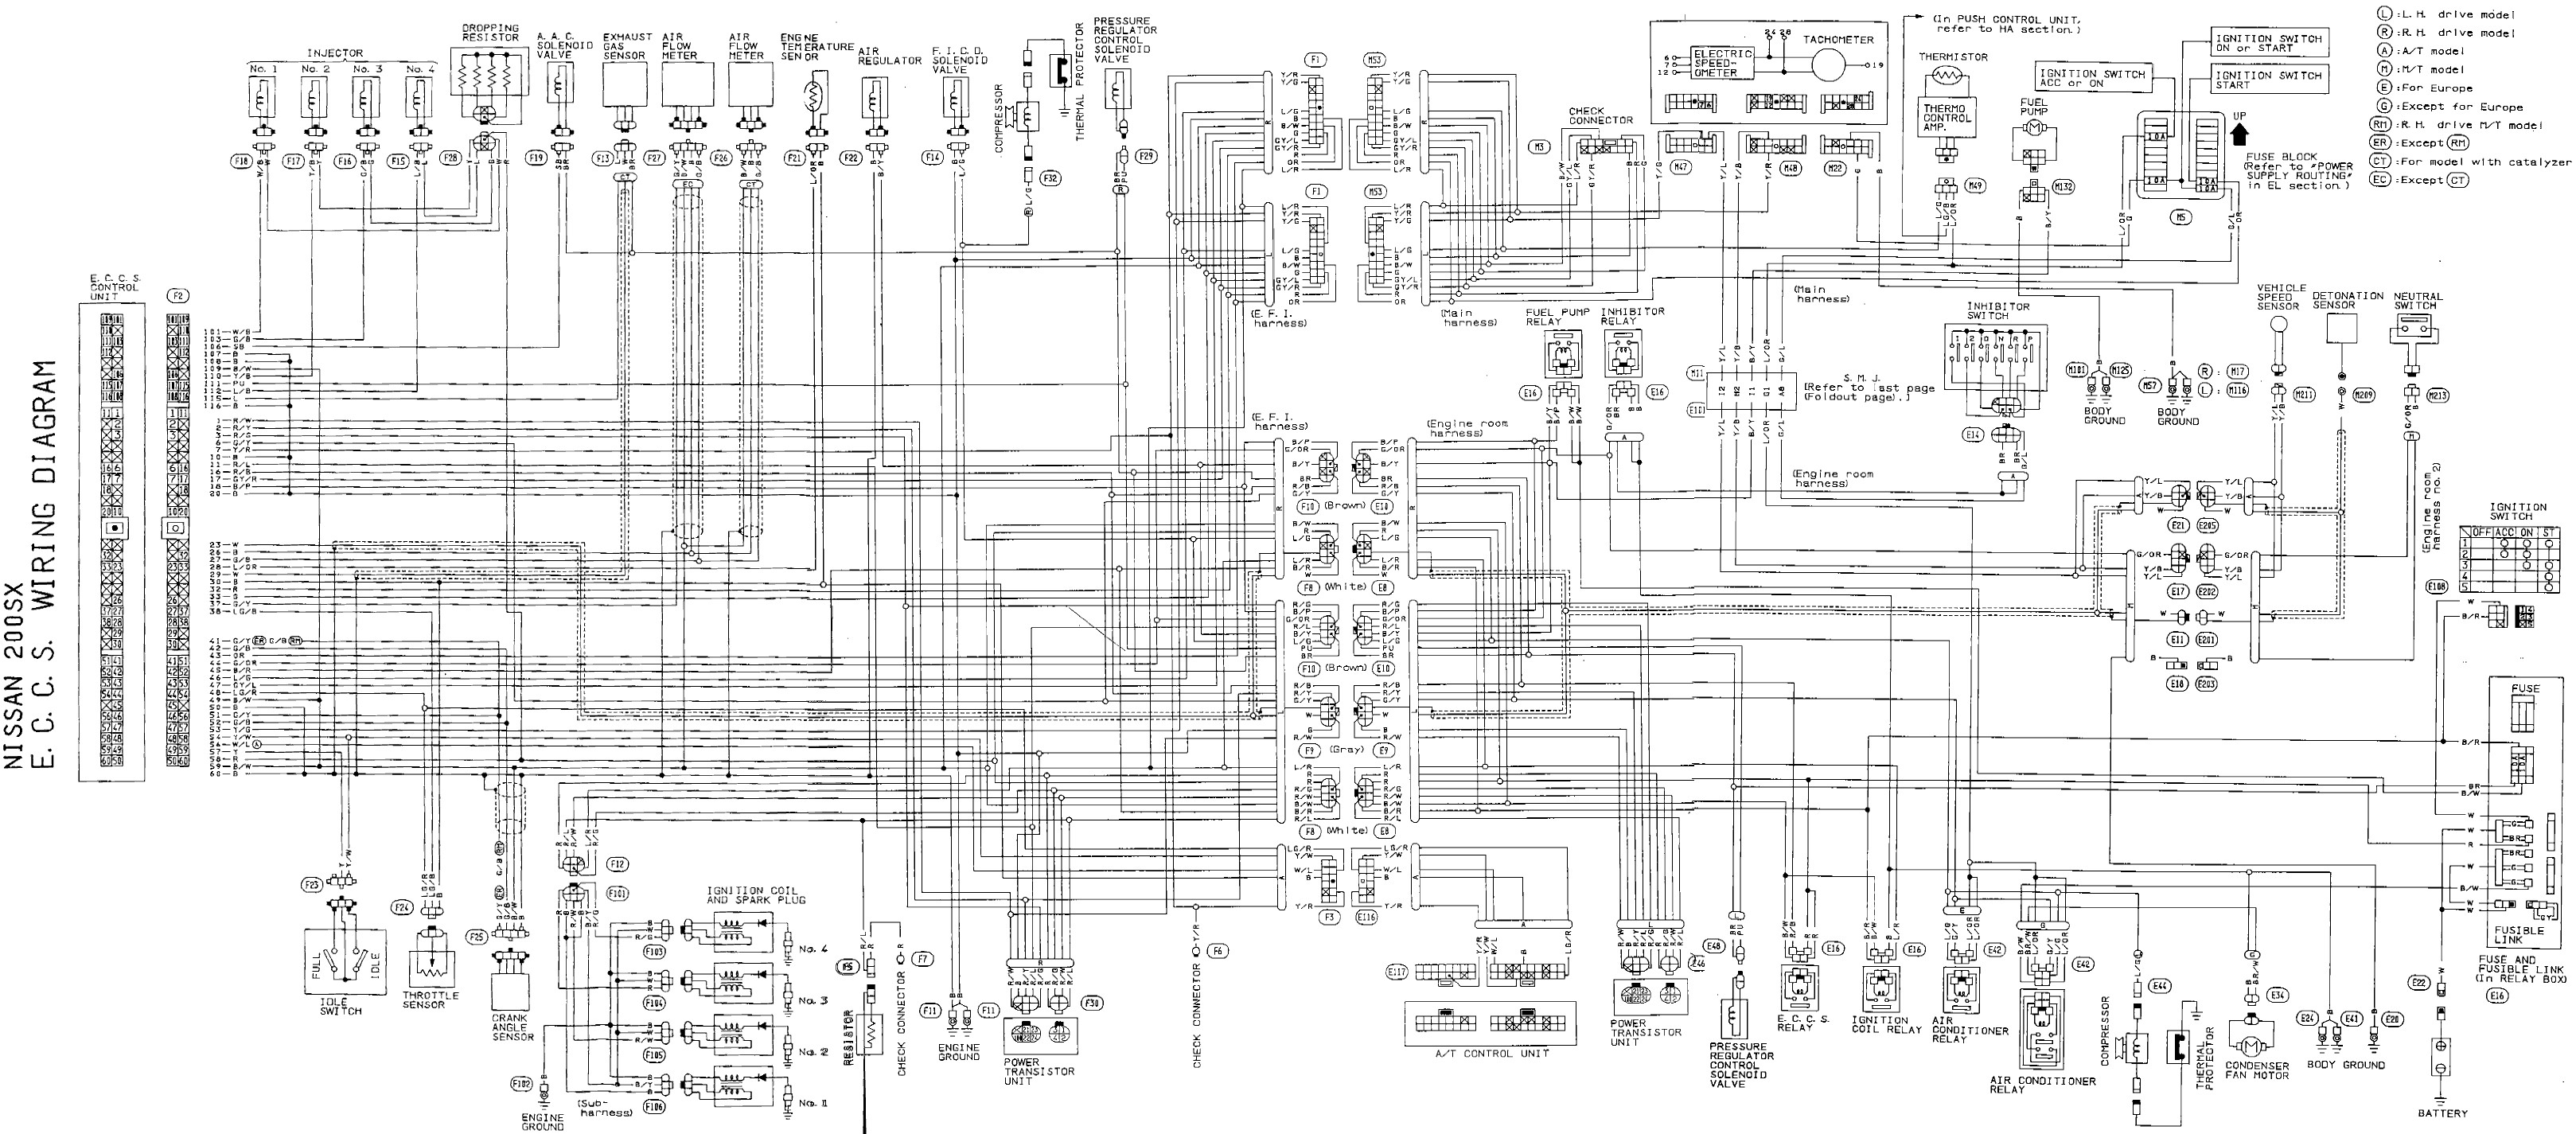 Wire Harness Diagram 200sx Engine Wiring Harness Get Free Image About Wiring Diagram Of Wire Harness Diagram